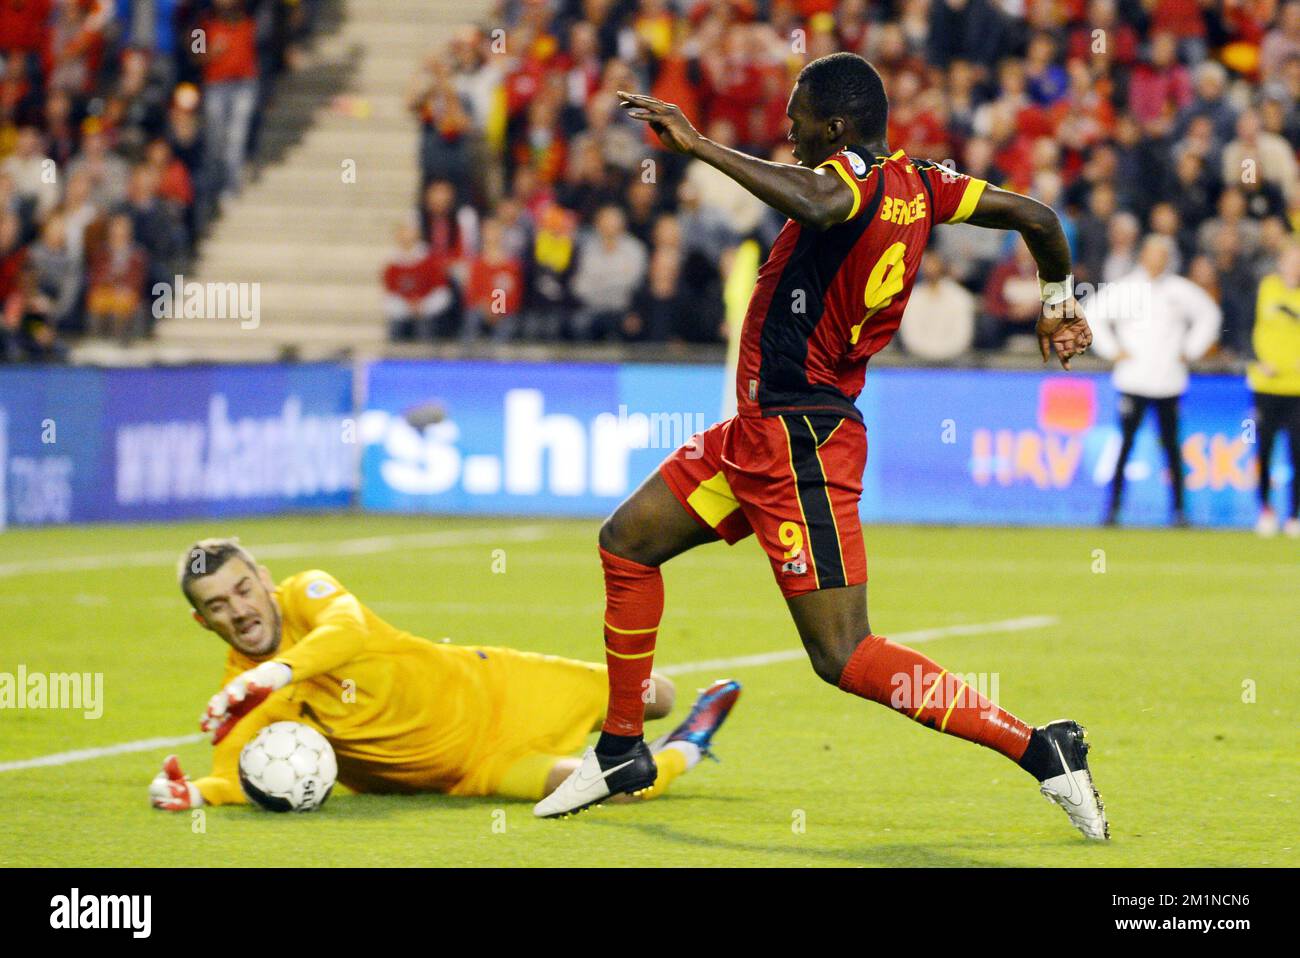 20120911 - BRUSSELS, BELGIUM: Belgium's Christian Benteke and Croatian's goalkeeper Stipe Pletikosa fight for the ball during the qualifying match between Belgium Red Devils and Croatia, Tuesday 11 September 2012 at the King Baudouin stadium, in Brussels. This is the second of ten qualifying games for the 2014 Soccer World Championships. BELGA PHOTO ERIC LALMAND Stock Photo